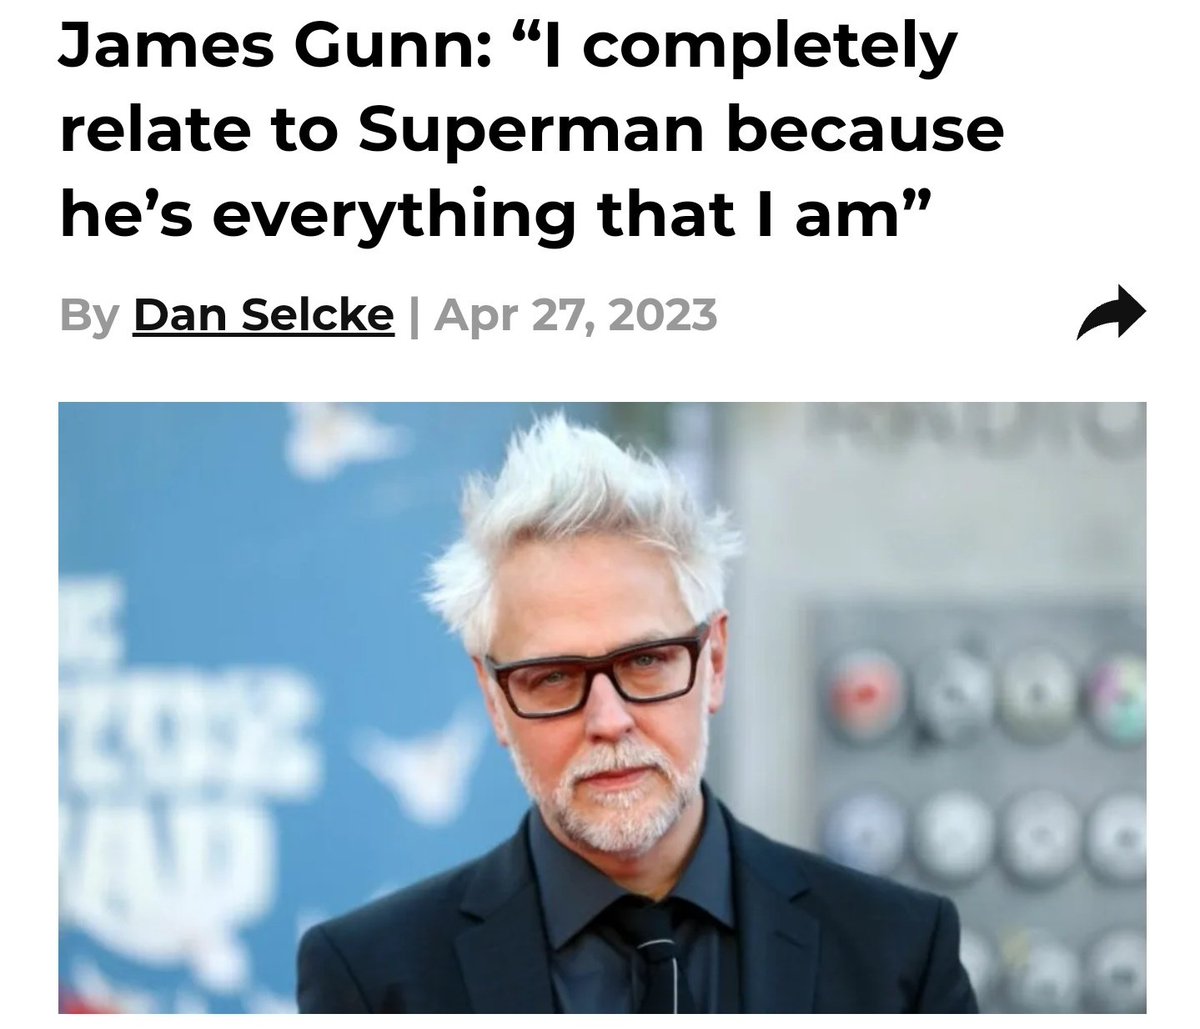 Hey, so remember how James Gunn, the guy who deleted over 10,000 tweets about p3dophilia overnight, has screwed over his colleagues, and invited a convicted sex offender to his p3do themed party, is literally a sociopath? Me too.